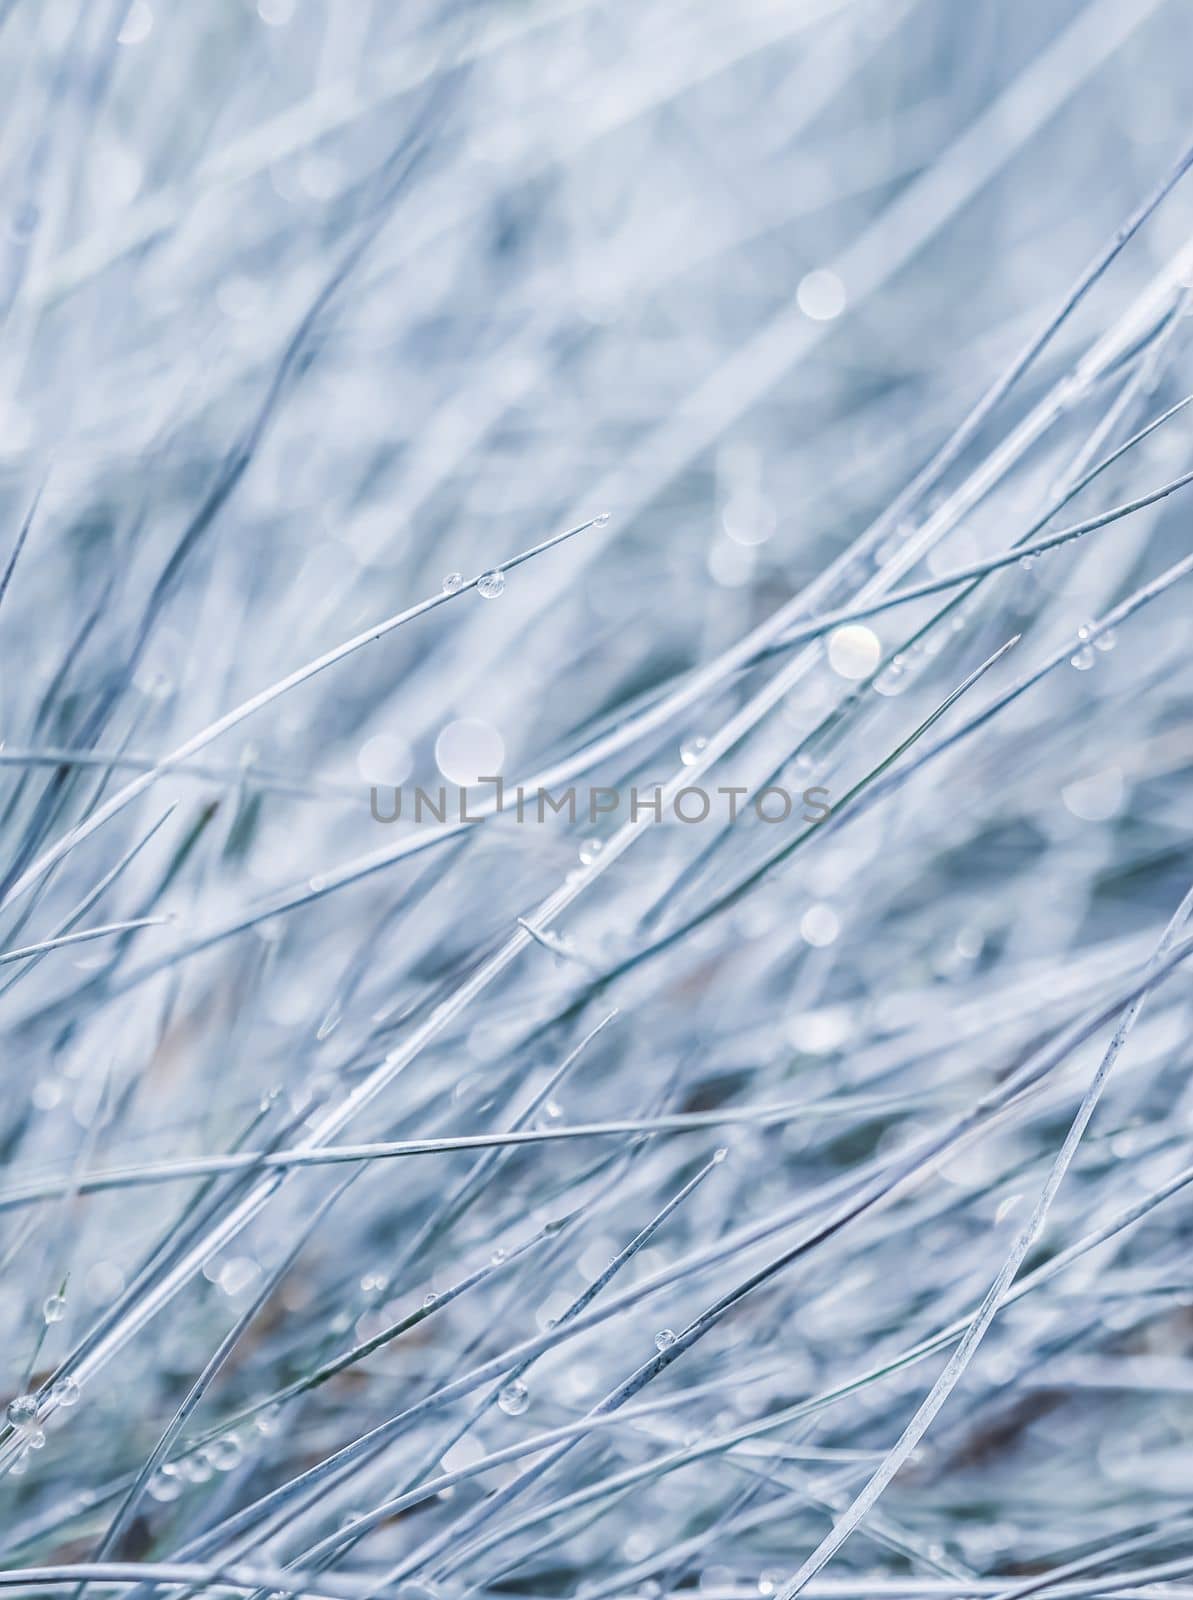 Blue white background of ornamental grass Festuca glauca with water drops. Soft focus